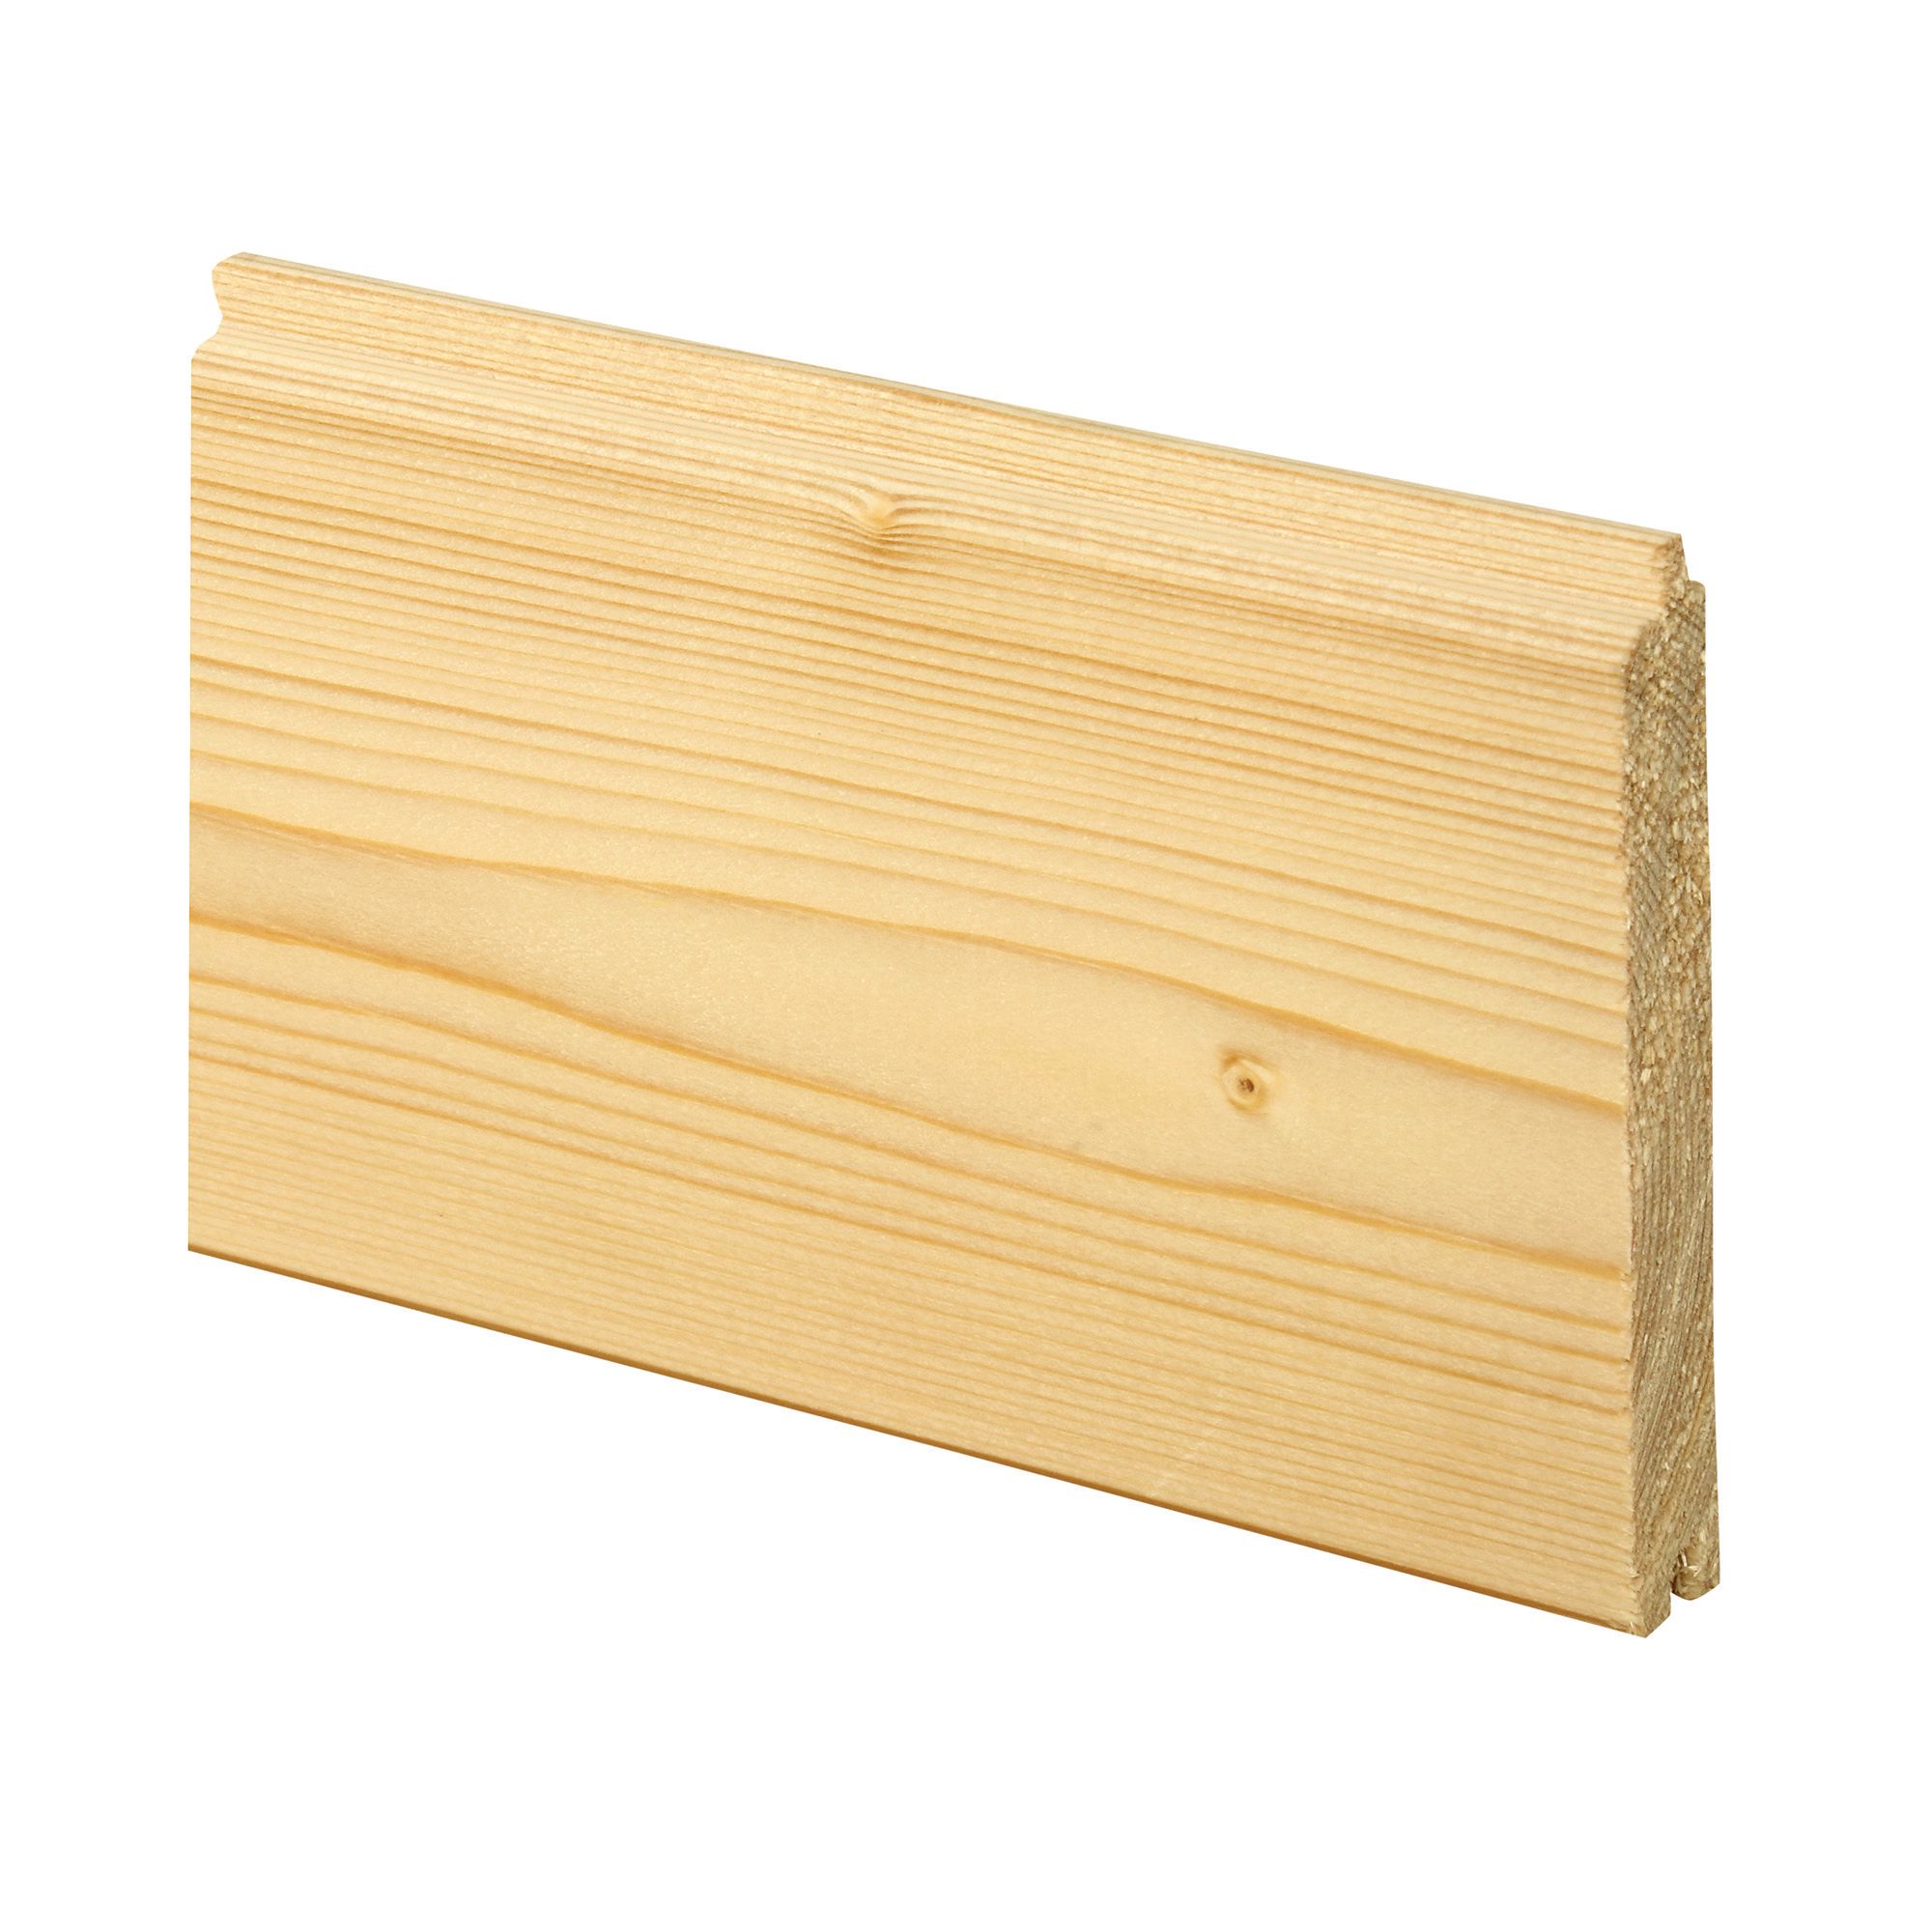 Image of Wickes General Purpose Softwood Cladding - 14mm x 94mm x 3000 mm